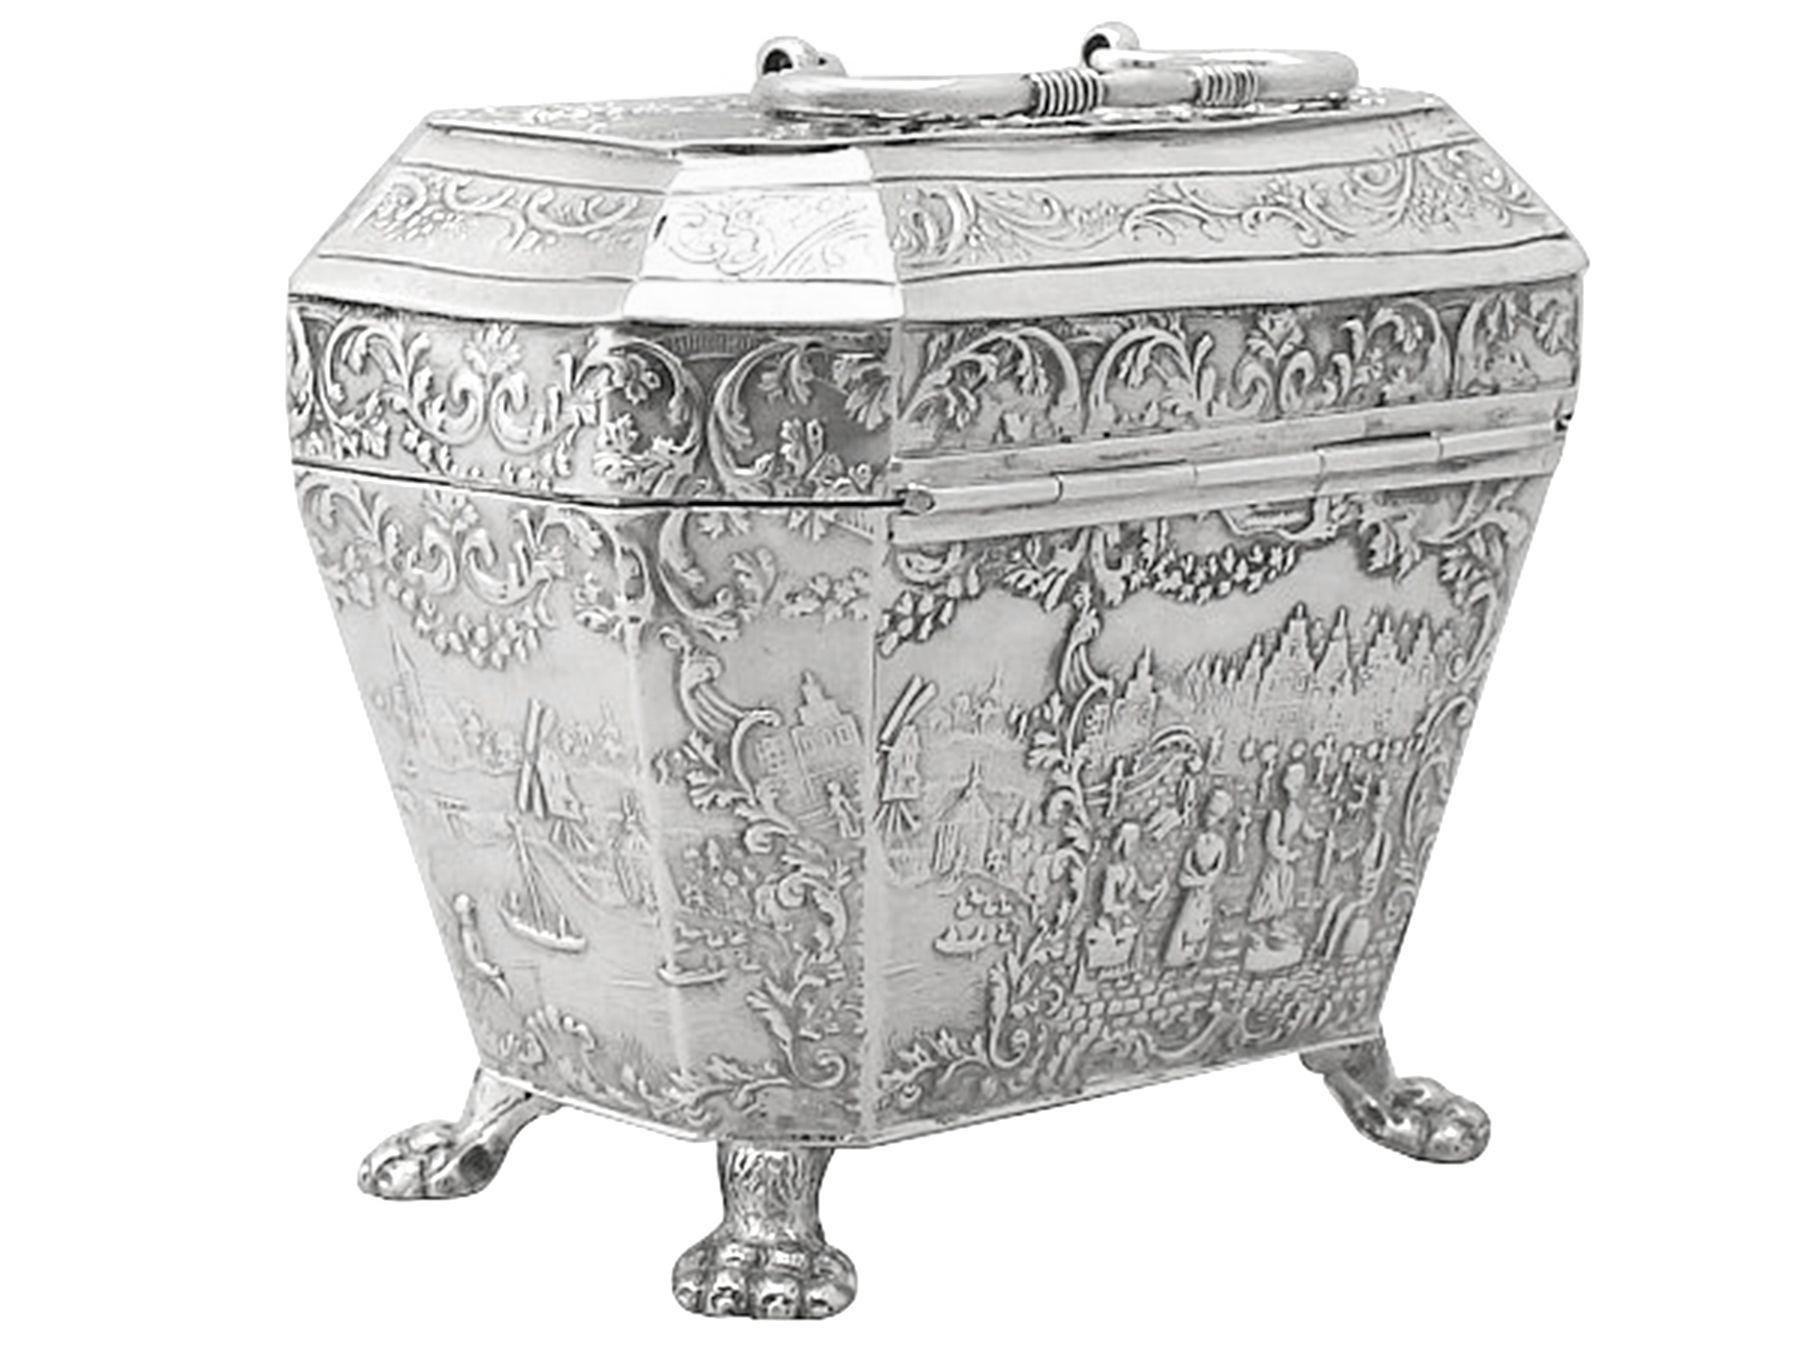 Antique Dutch Silver Tea Caddy In Excellent Condition For Sale In Jesmond, Newcastle Upon Tyne